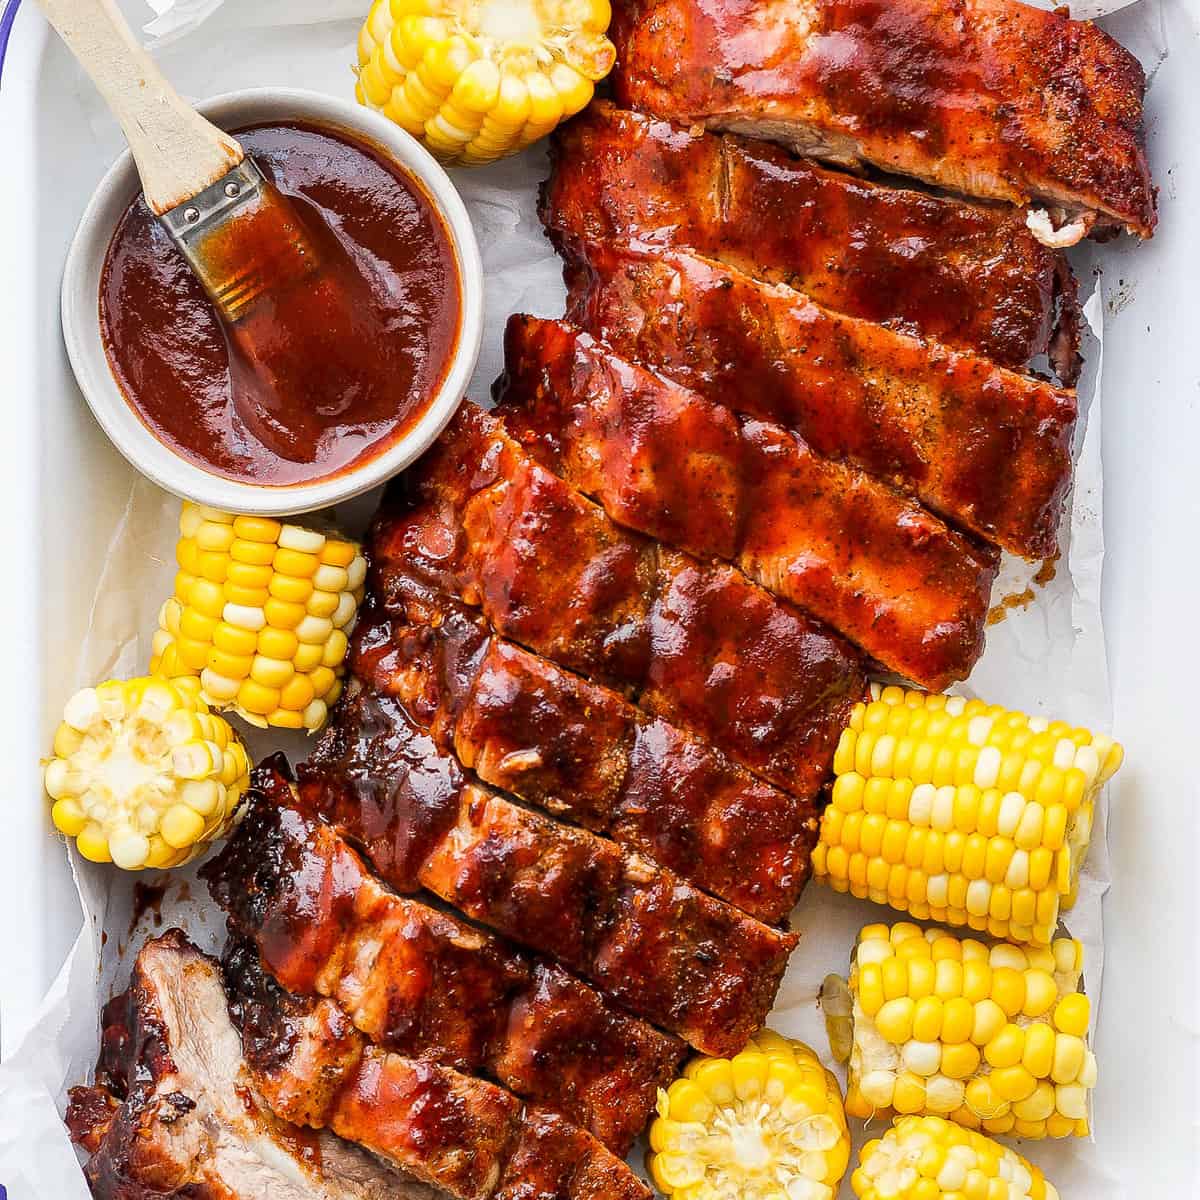 https://fitfoodiefinds.com/wp-content/uploads/2023/04/Grilled-Ribs-sq.jpg